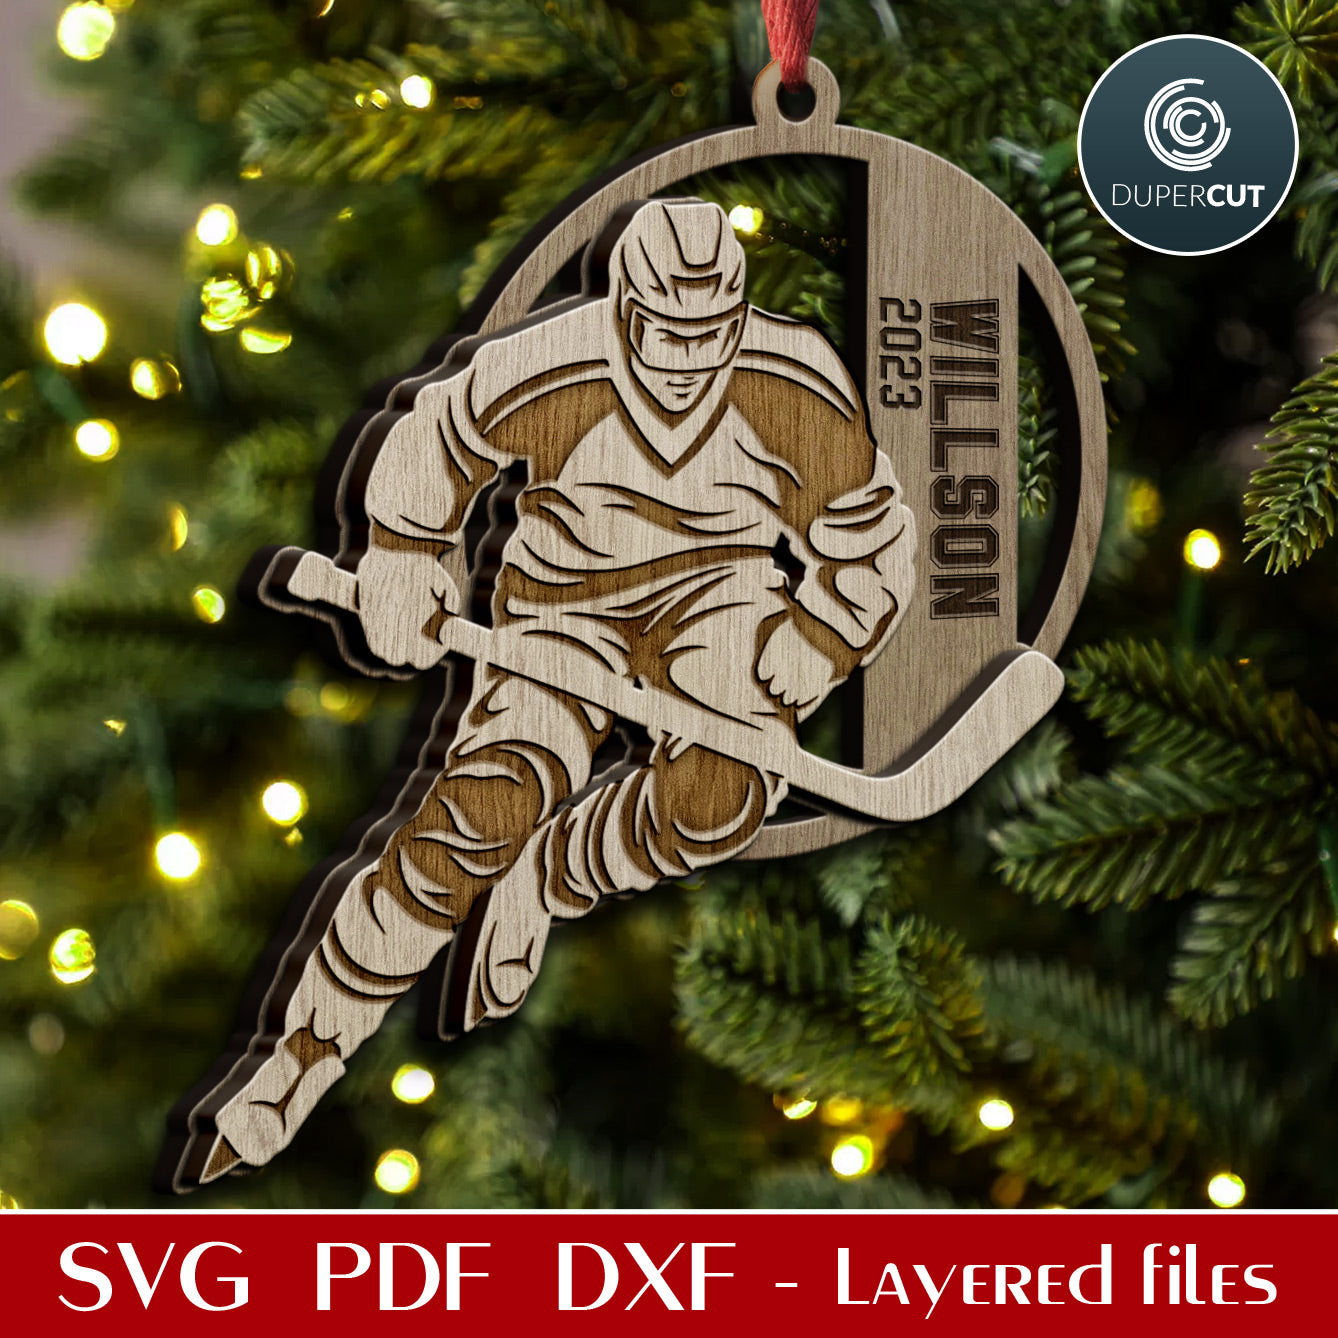 Hockey player Christmas ornament personalized gift, SVG layered vector cut file for laser engraving Glowforge, X-tool, Cricut, CNC plasma machines by www.DuperCut.com